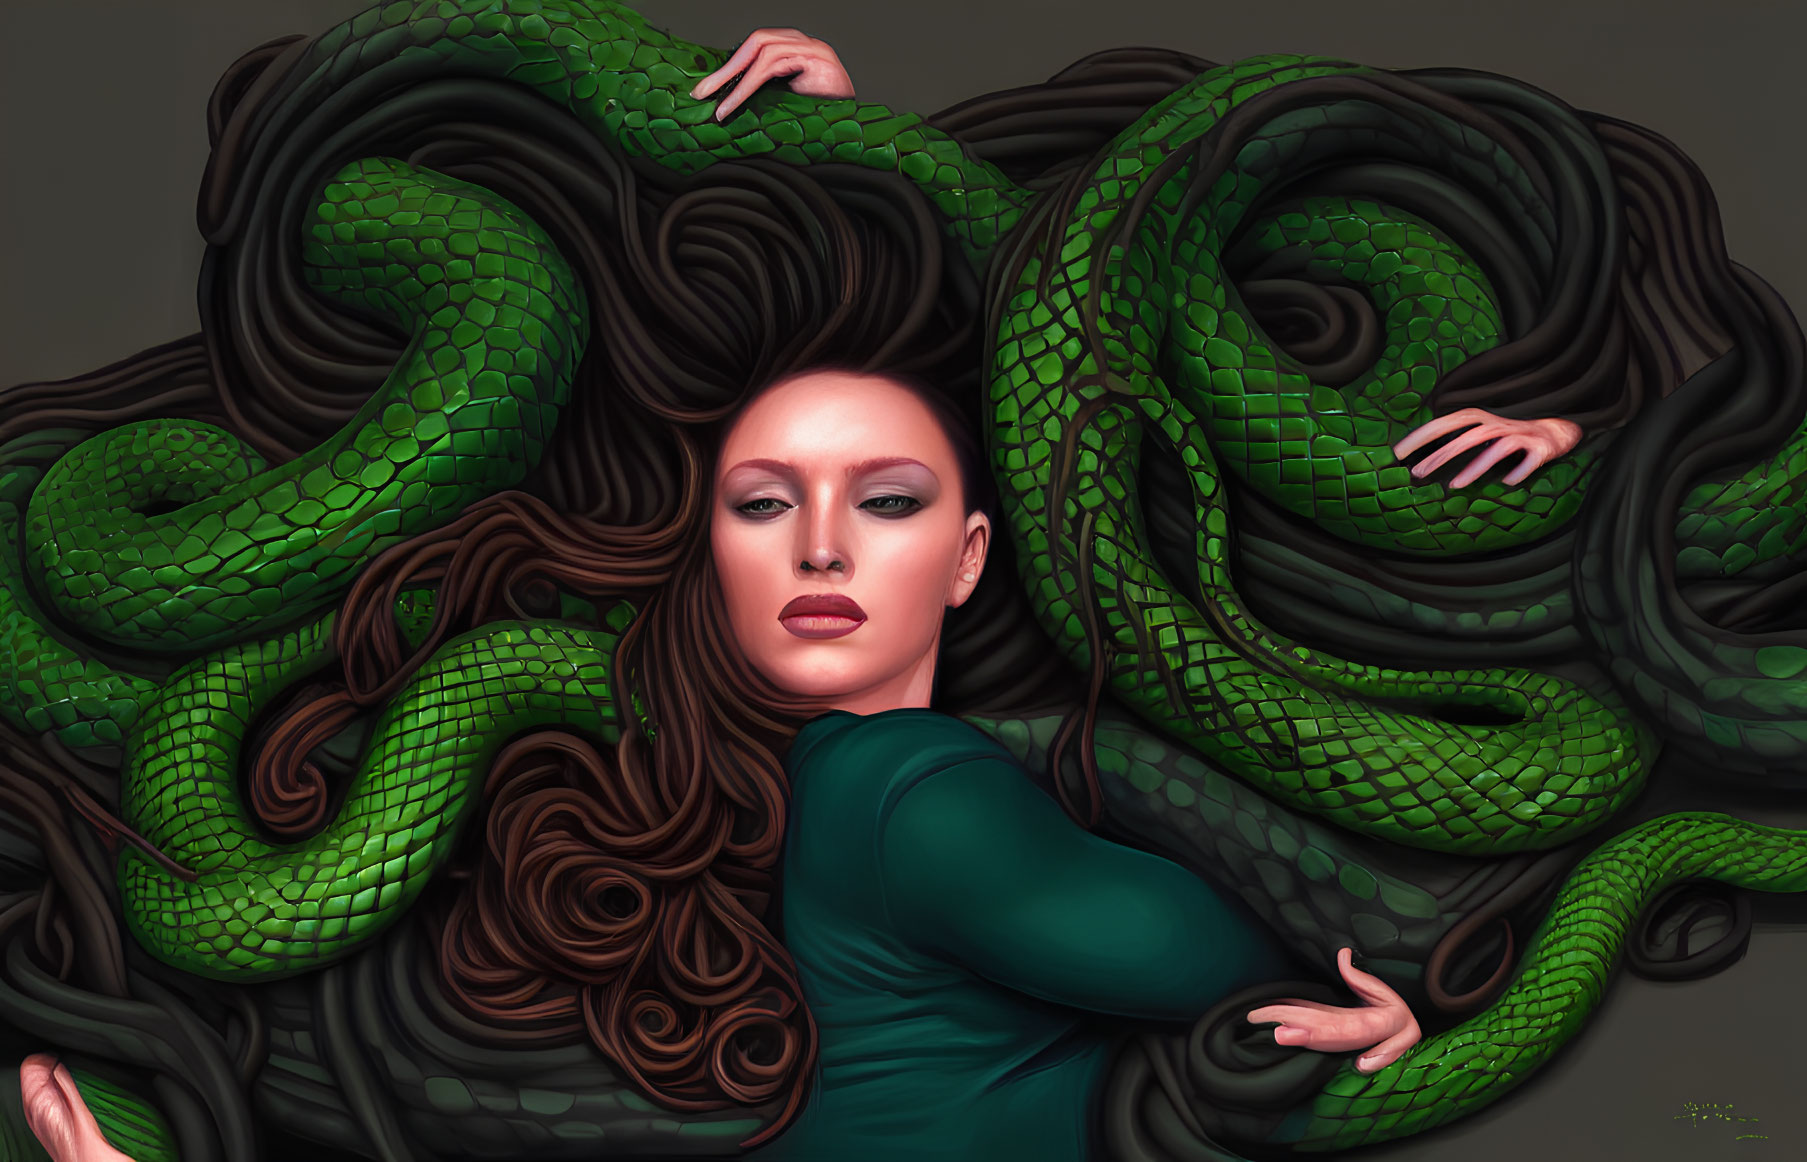 Woman entwined with vibrant green snakes, brown hair mingling.